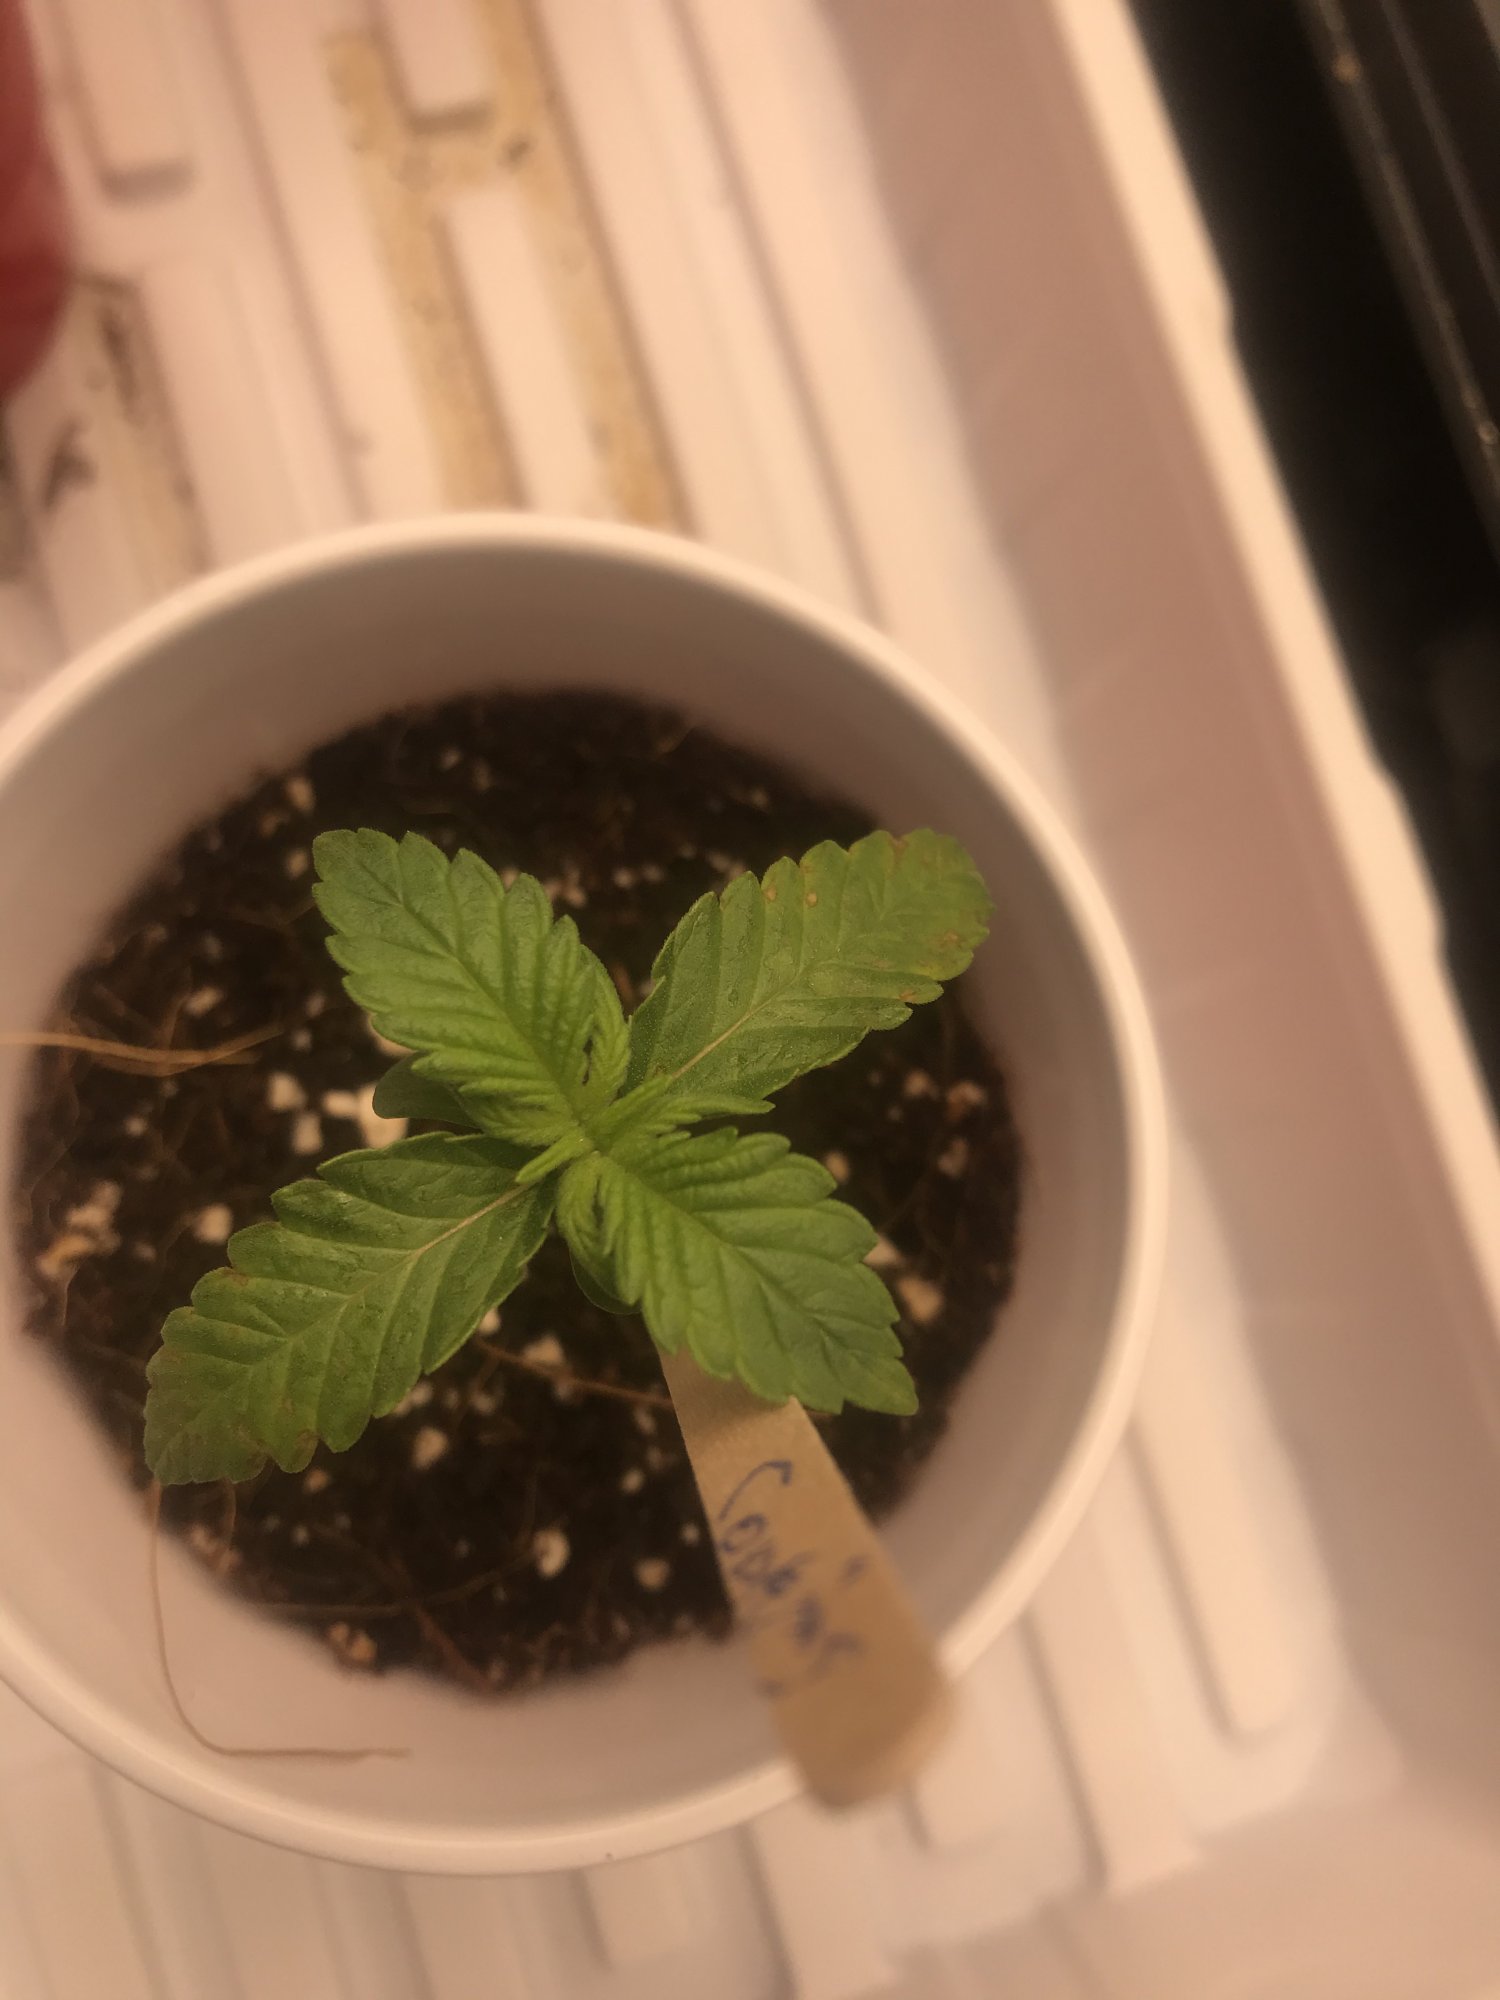 Having some issues with 1 plant of 4 2